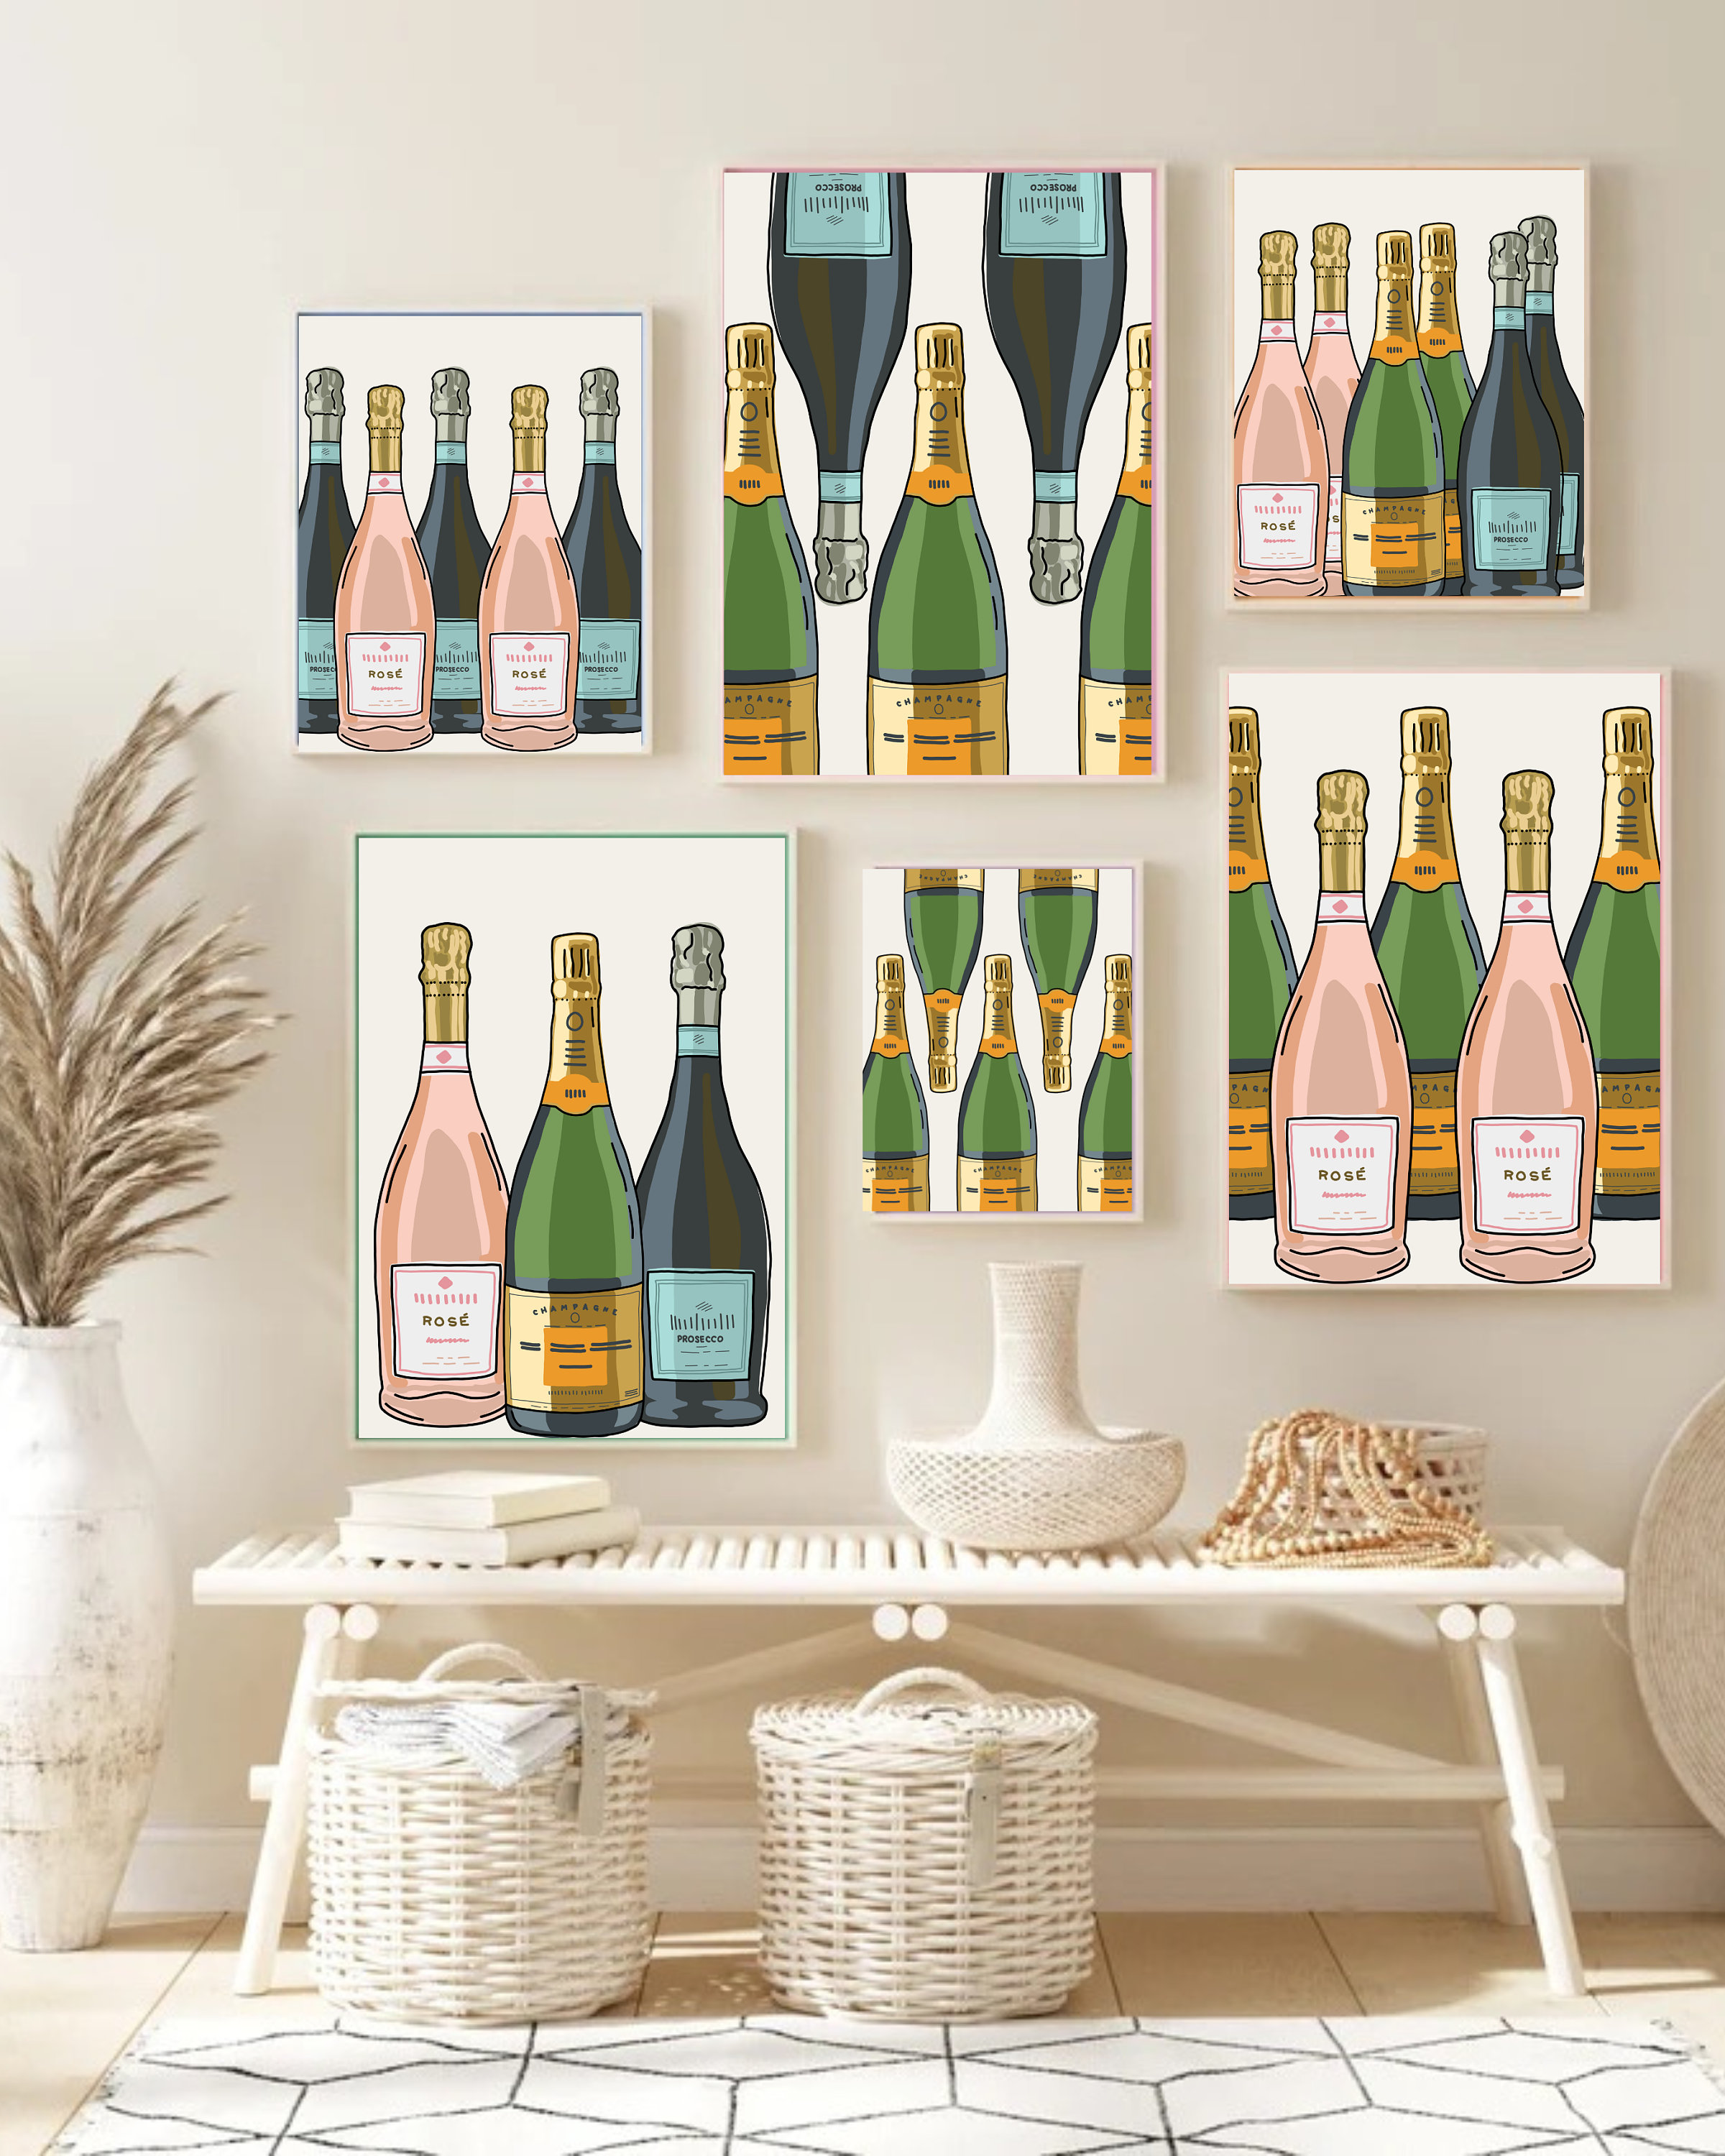  Champagne Veuve Clicquot Poster - Wine Poster Wine Advertising  Drink Vintage Poster Canvas Painting Posters and Prints Wall Art Pictures  for Living Room Bedroom Decor 20x30inch(50x75cm): Posters & Prints